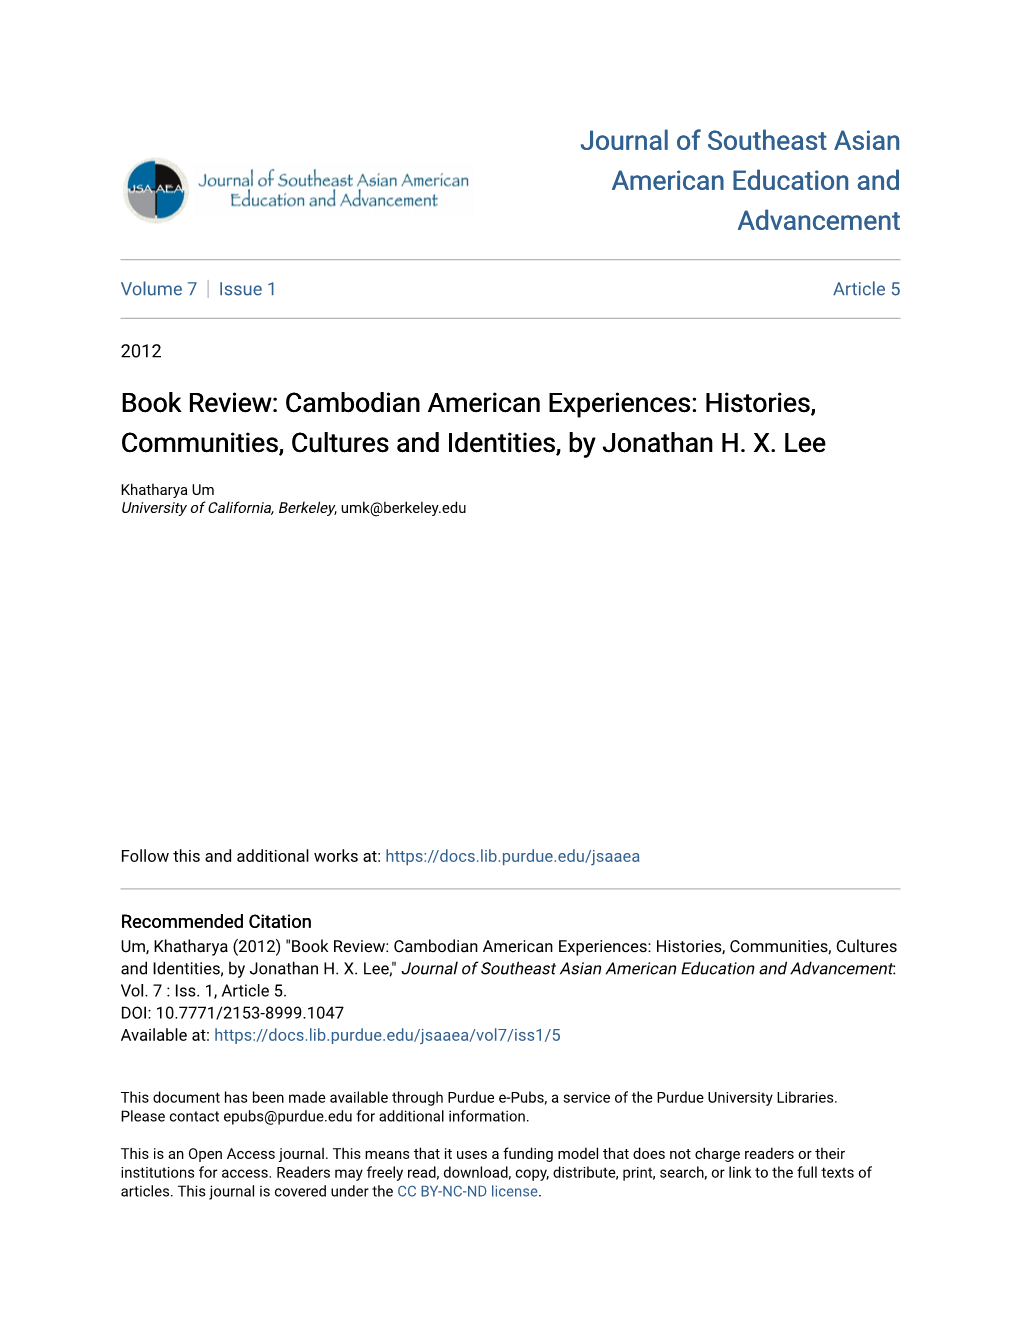 Cambodian American Experiences: Histories, Communities, Cultures and Identities, by Jonathan H